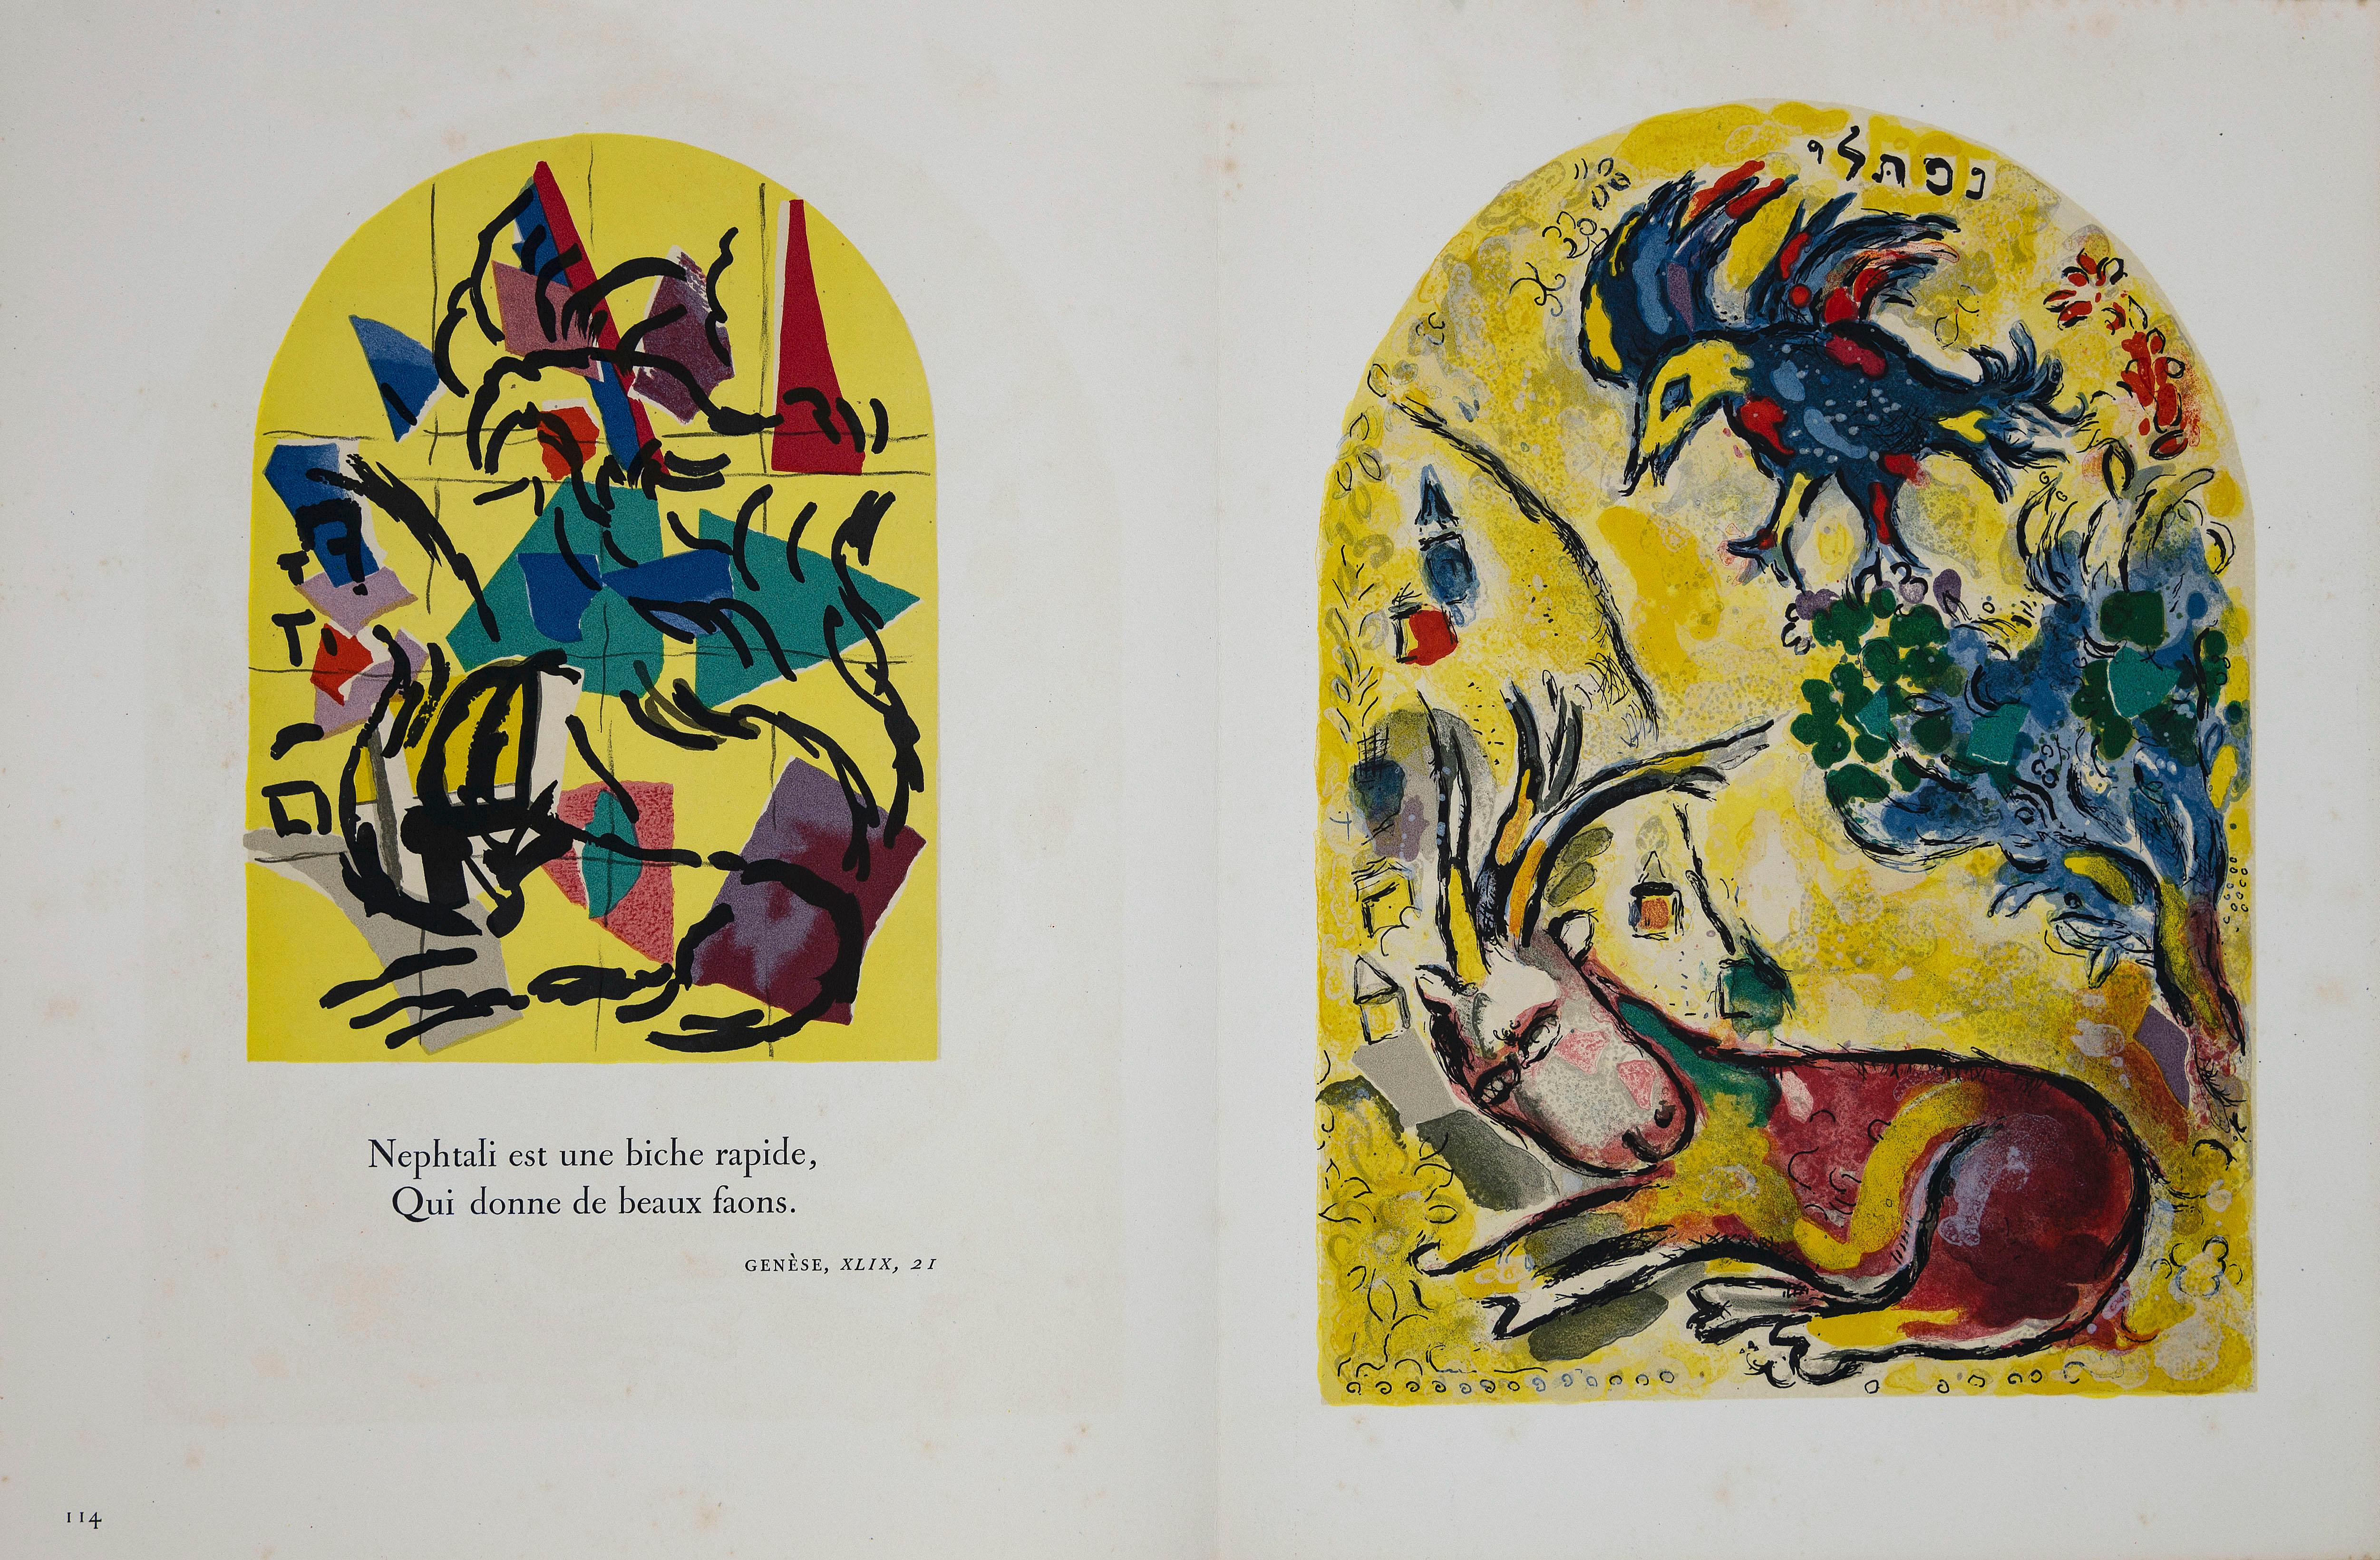 Vitraux pour Jérusalem - Illustrated Book by M. Chagall, 1962 - Print by Marc Chagall